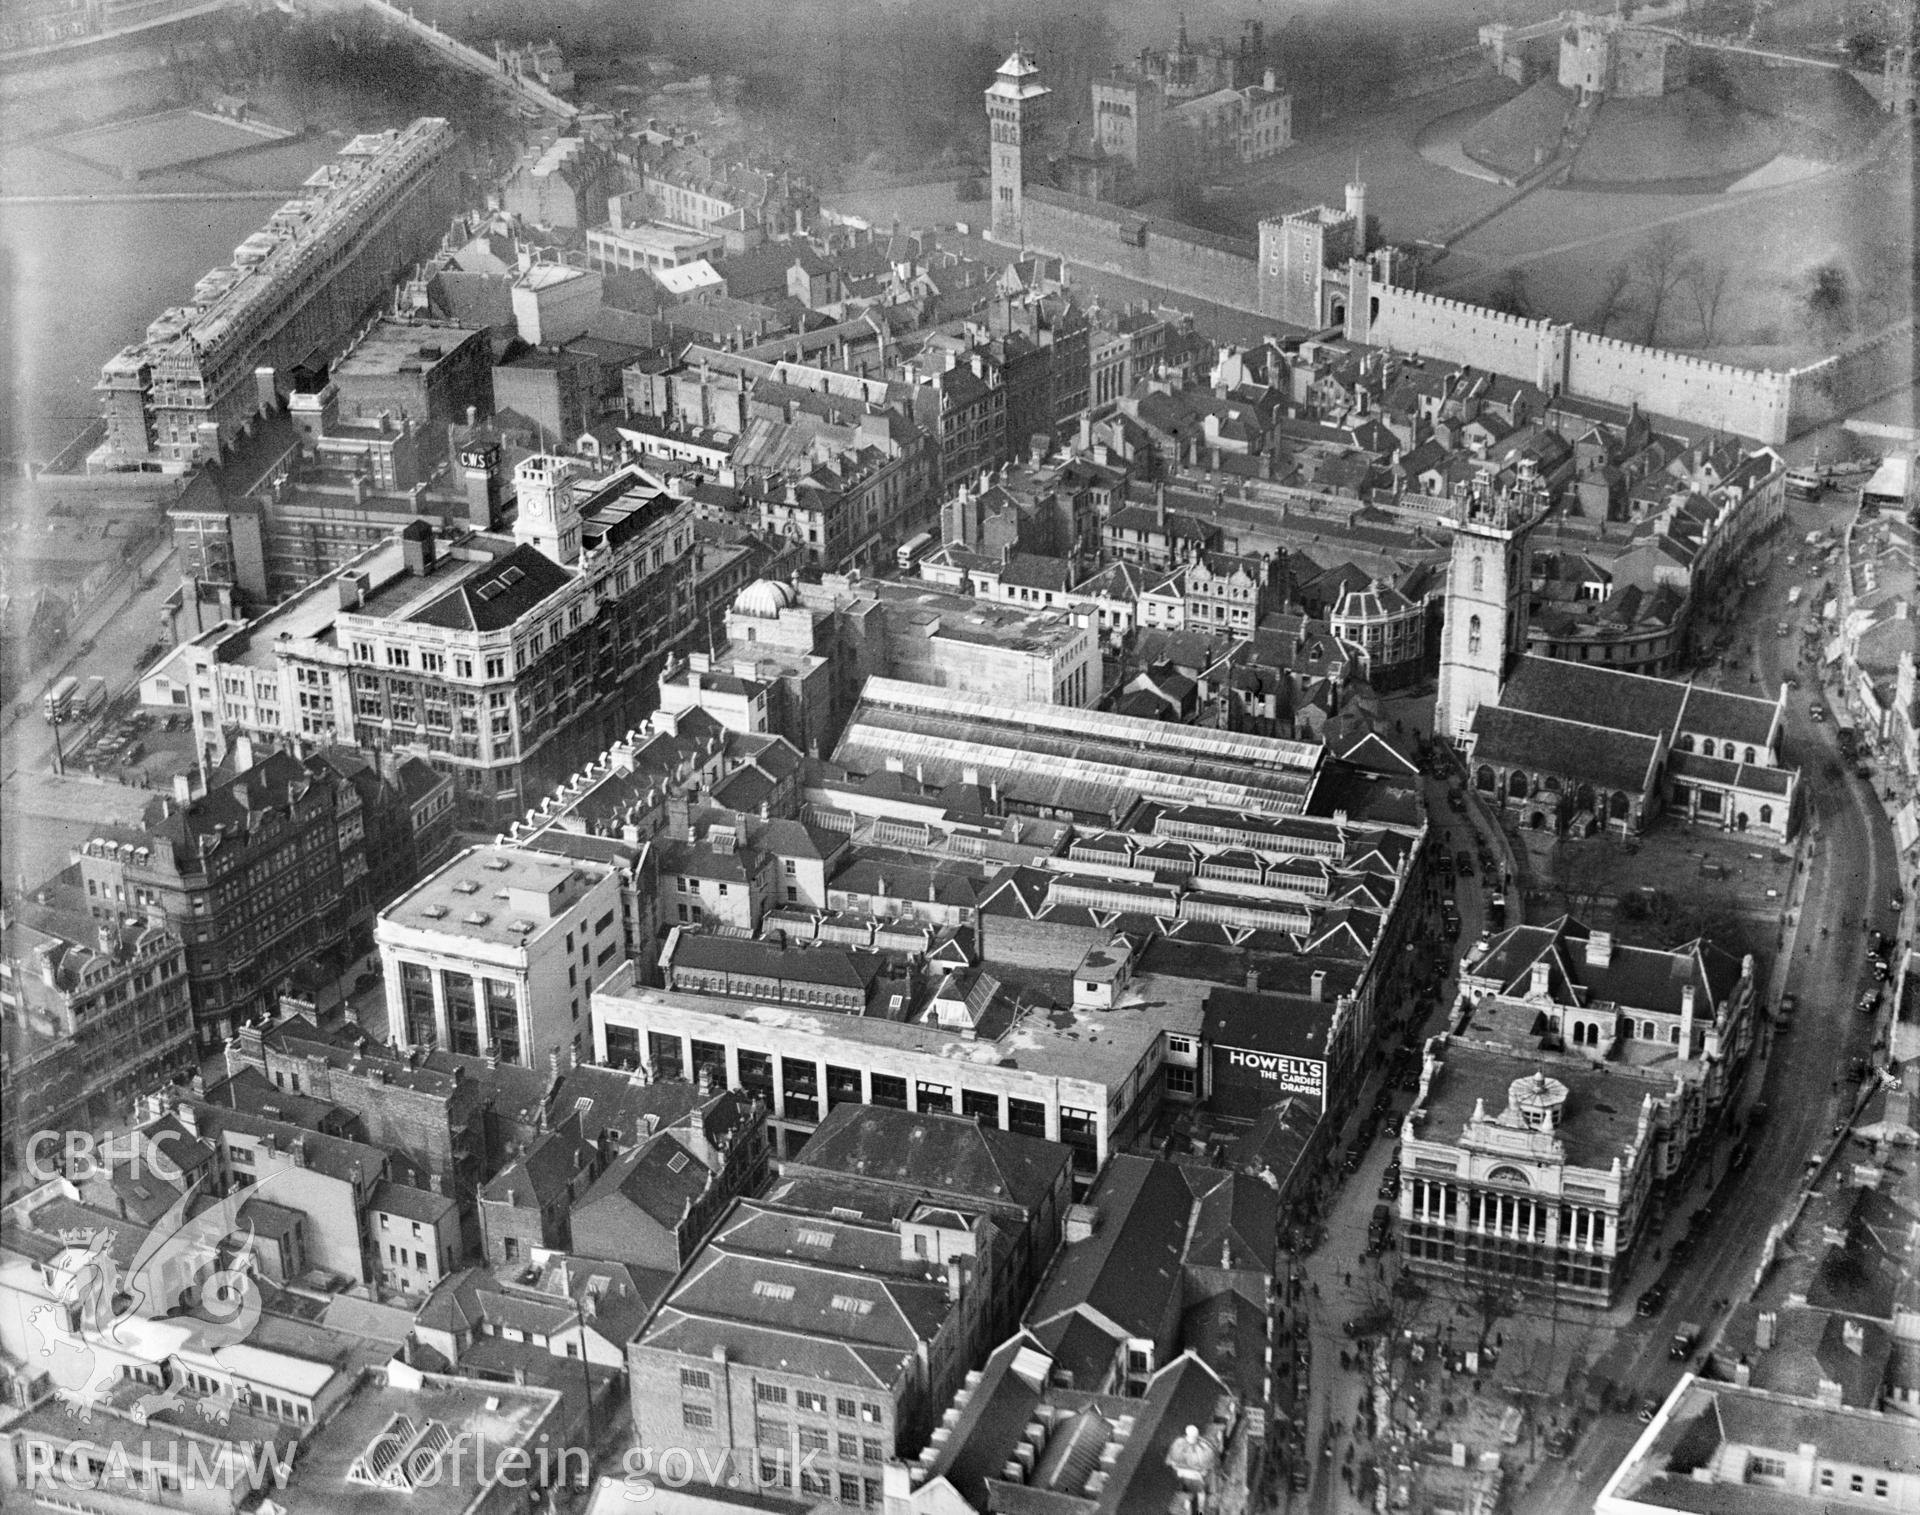 View of central Cardiff, showing James Howell & Co. Ltd. and central library, oblique aerial view. 5?x4? black and white glass plate negative.